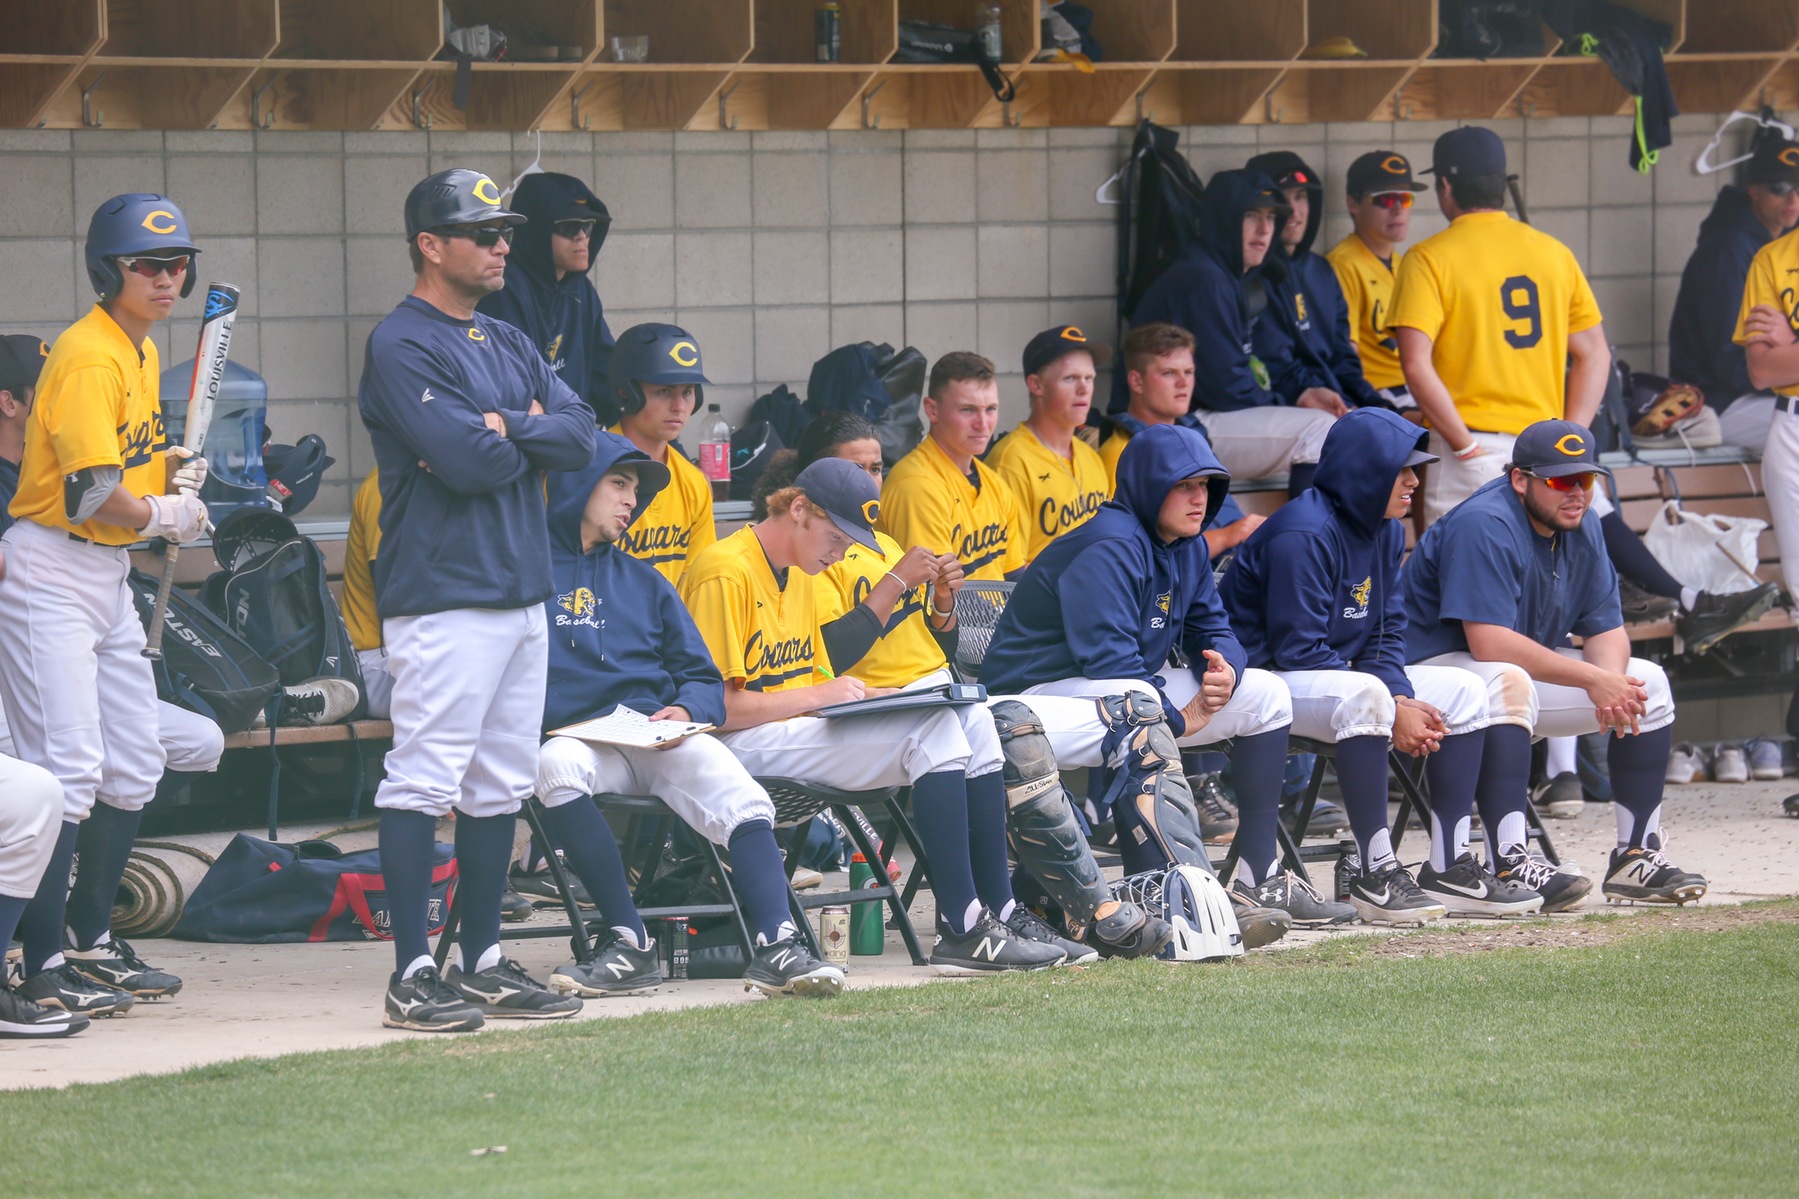 College of the Canyons baseball vs. Glendale College.